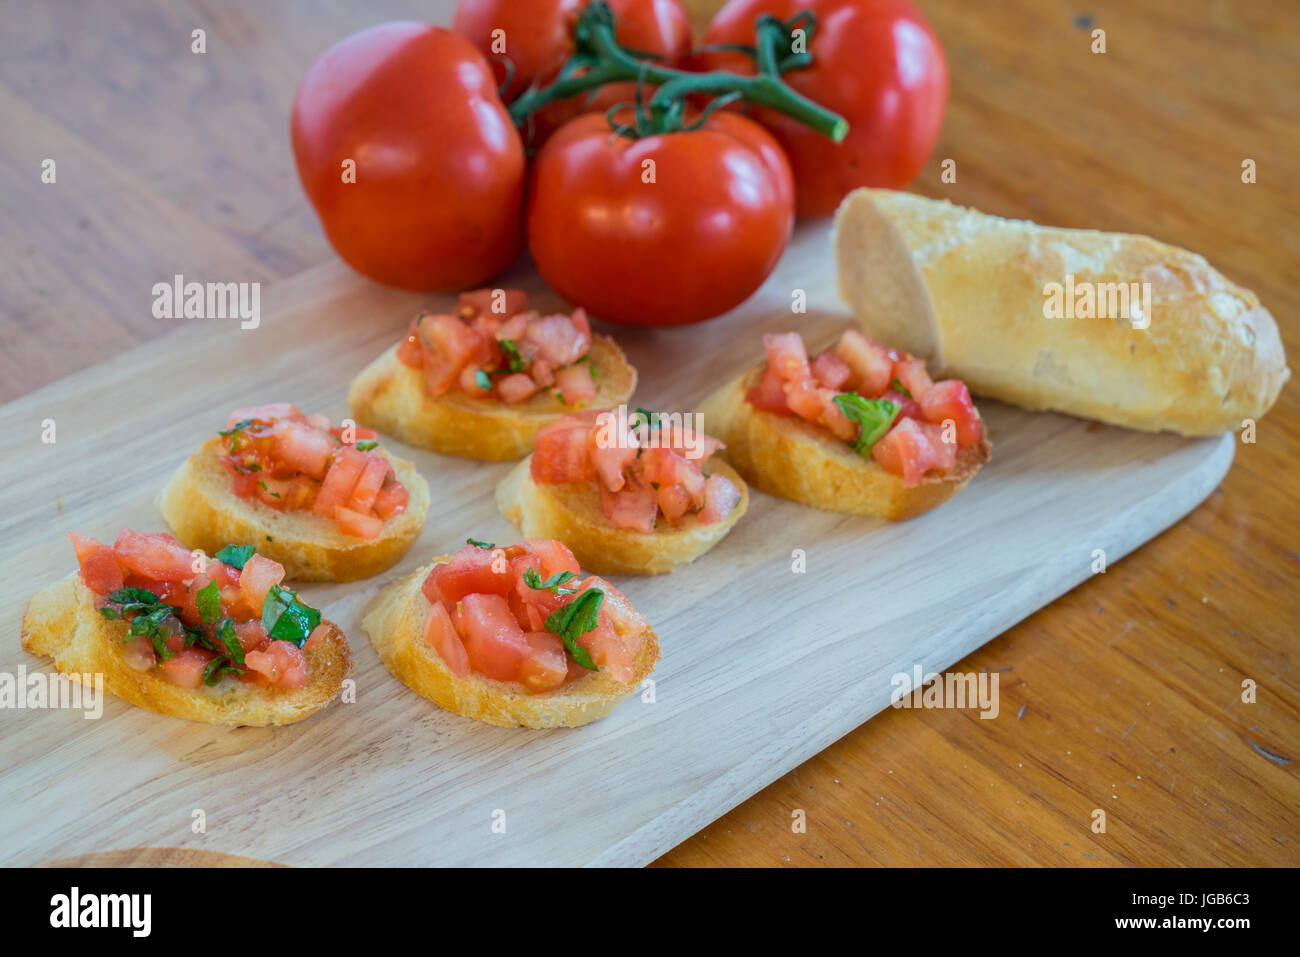 Tomato & basil bruschetta on a wooden cutting board with tomatos and baguette. Stock Photo